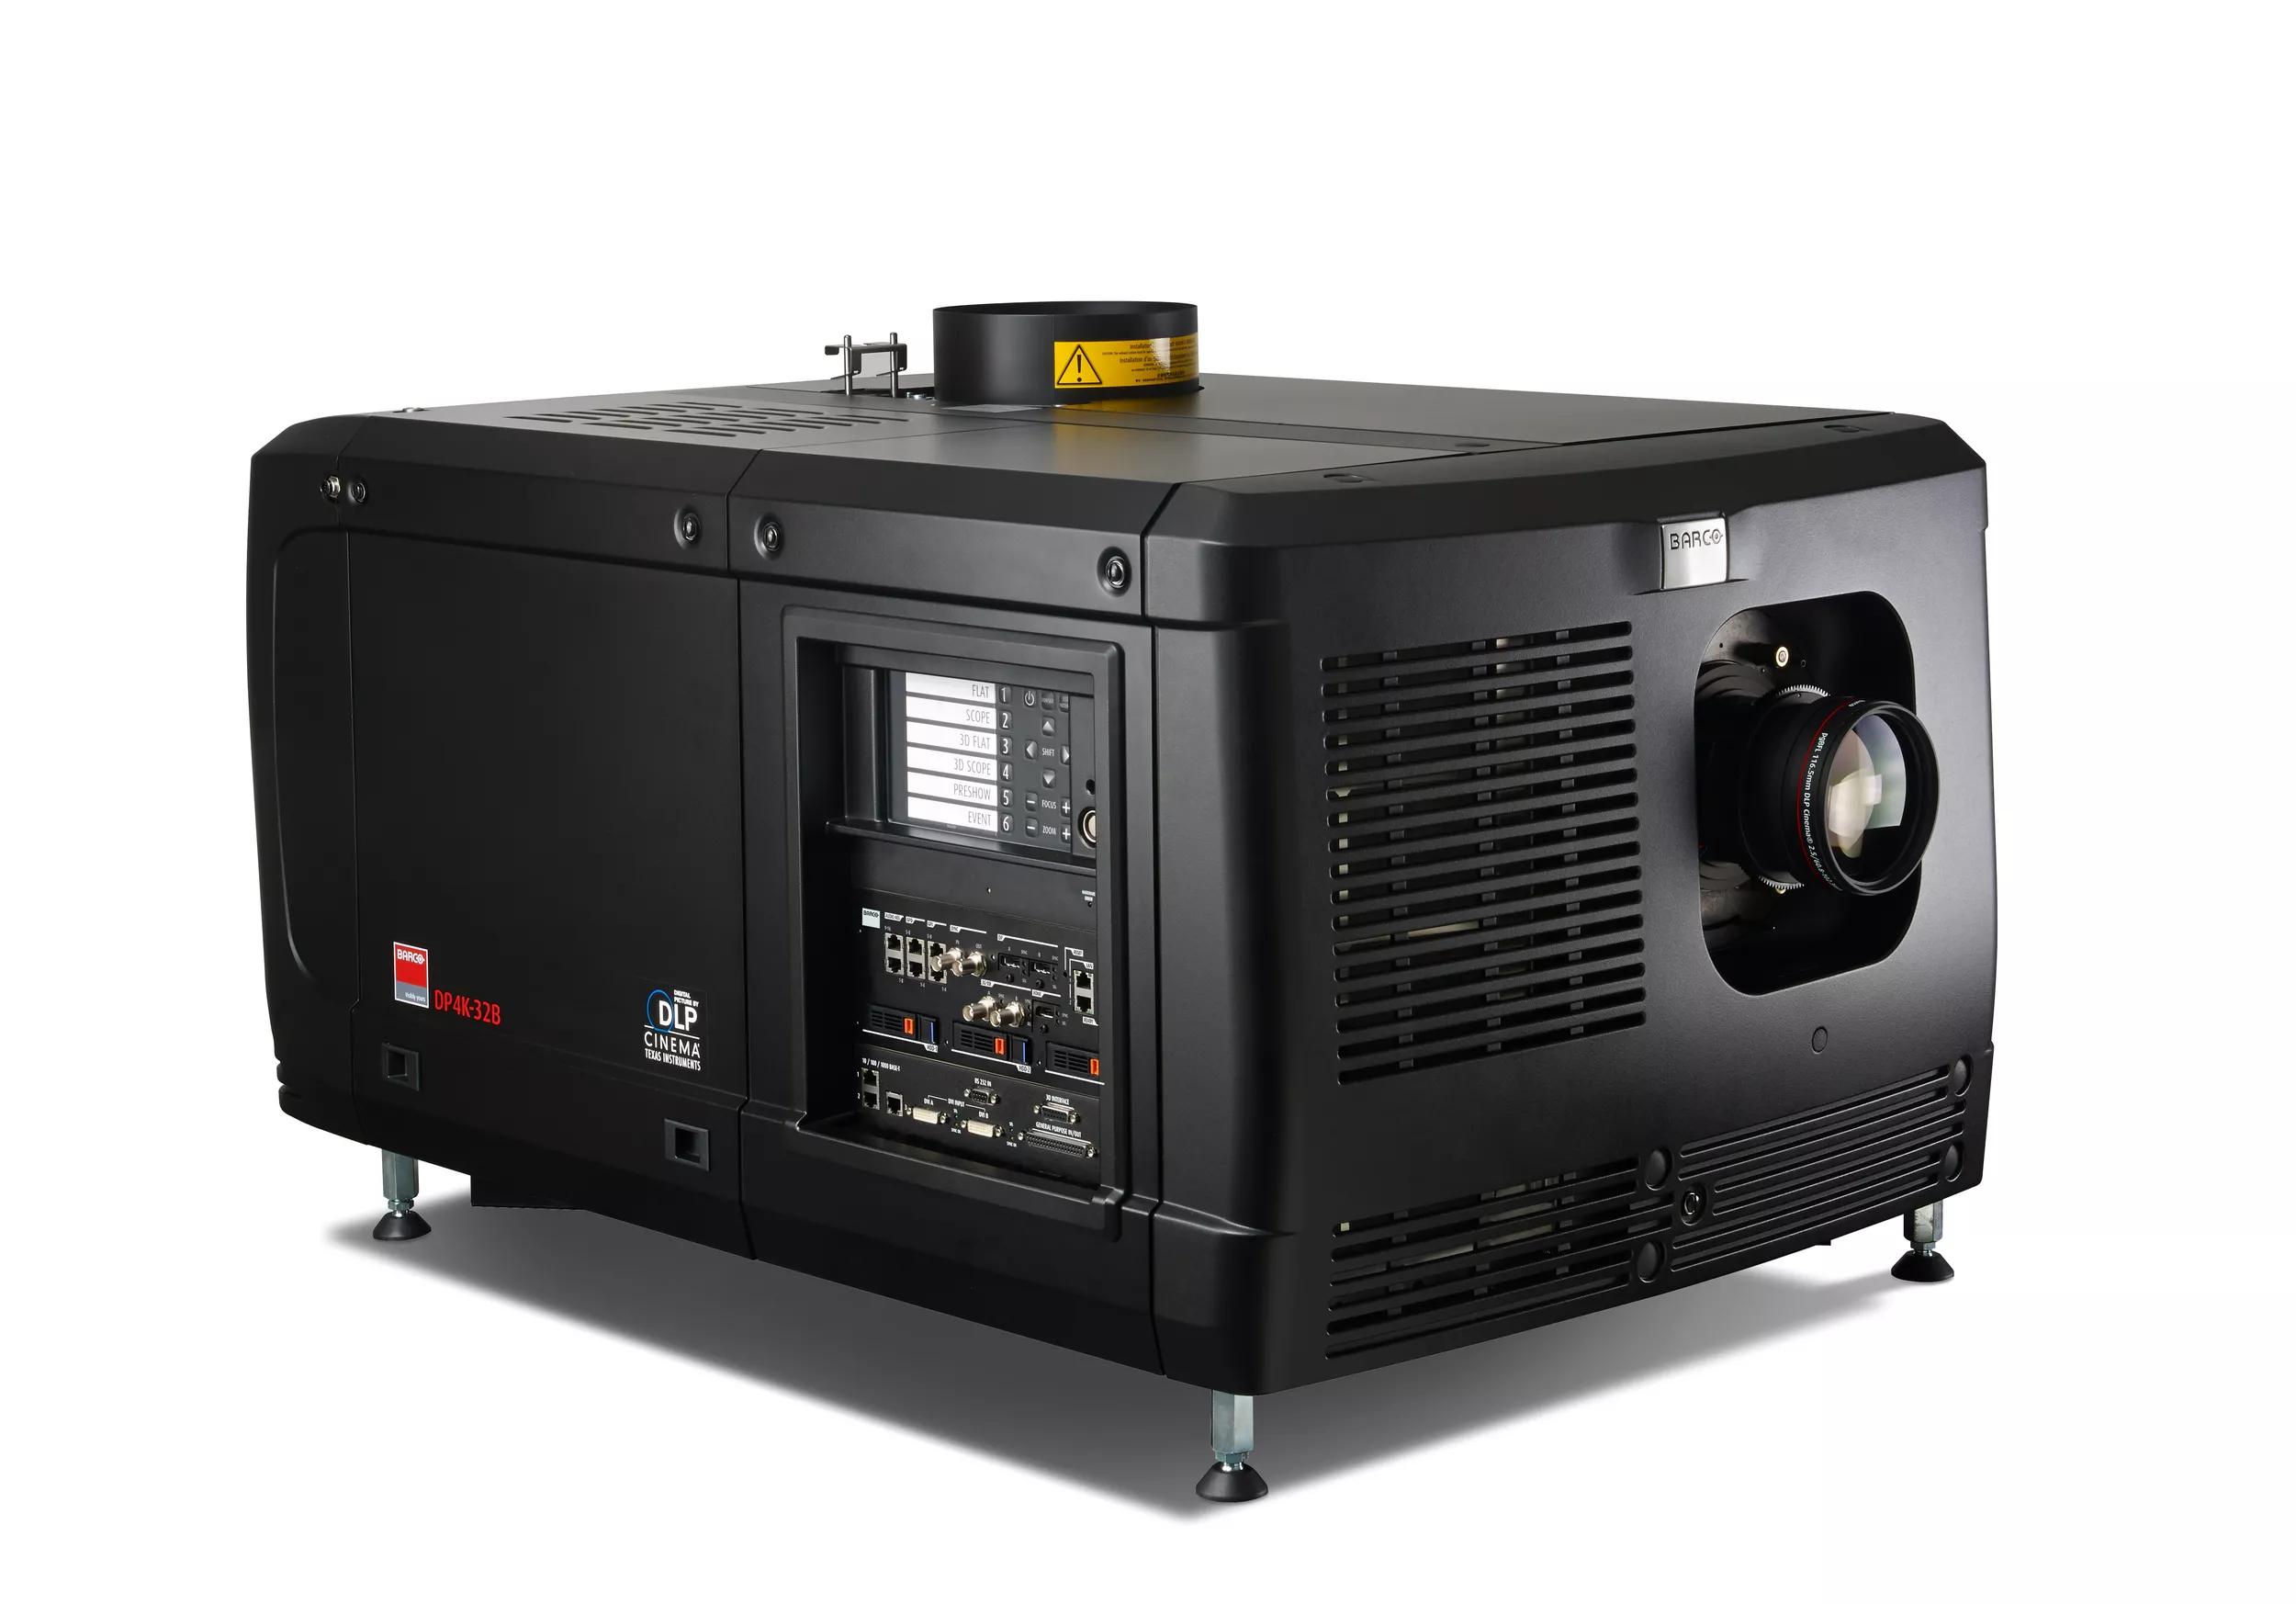 DP2K-32B - Product support - Barco